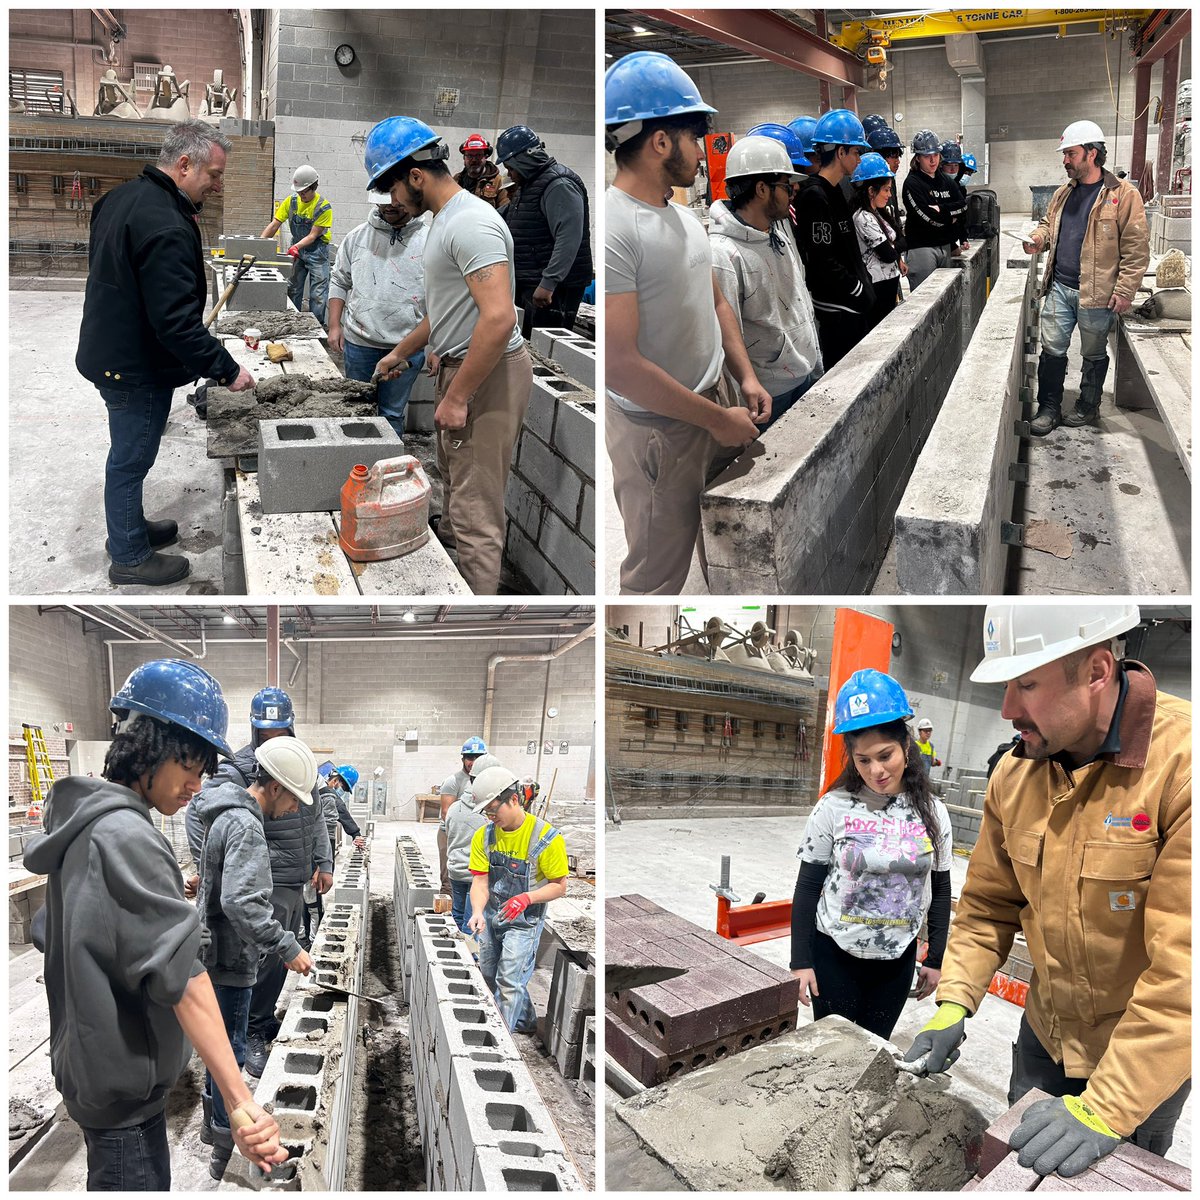 Thanks to the Ontario Masonry Training Centre for the great day of learning @PeelSchools @Bramalea_SS @SkilledTradesON @SHSMPeel